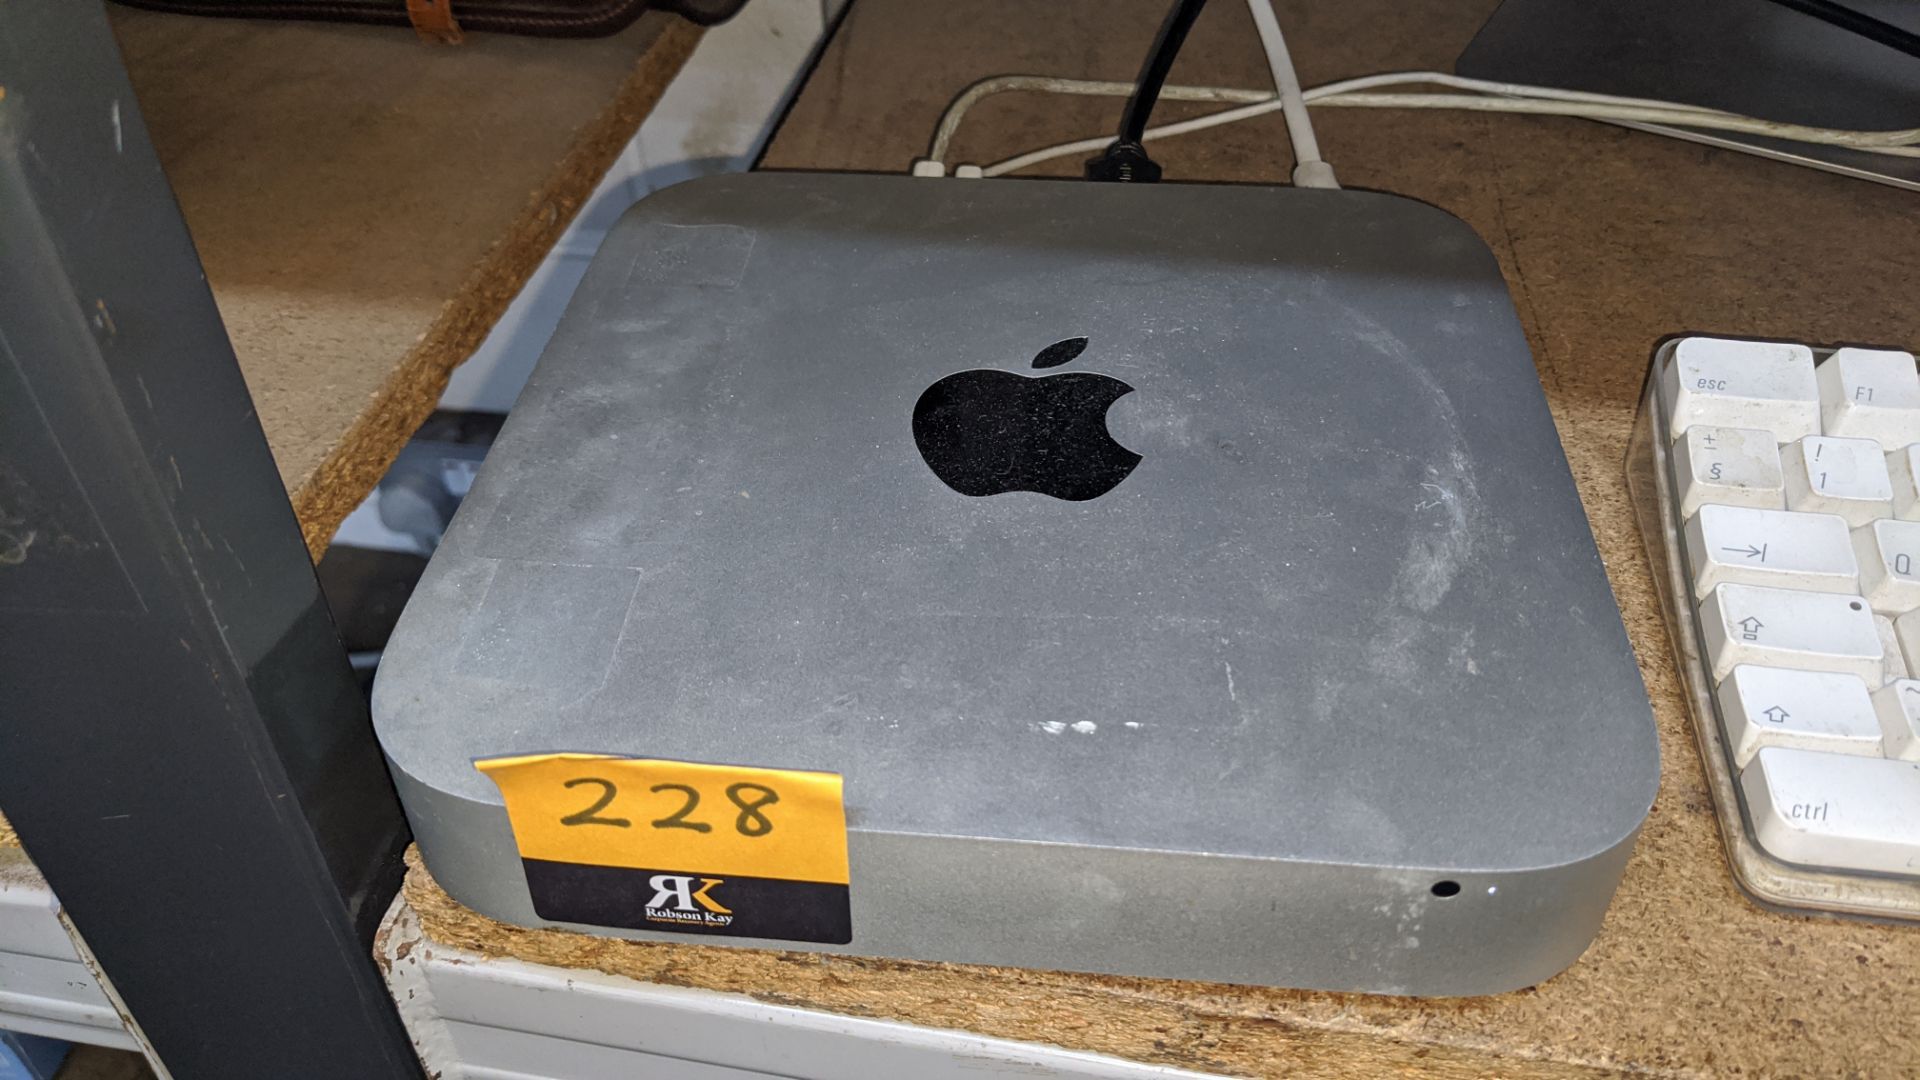 Apple Mac mini computer model A1347 with 2.5GHz Intel Core i5 CPU, 8Gb RAM, 500Gb HDD. Please note - Image 3 of 10